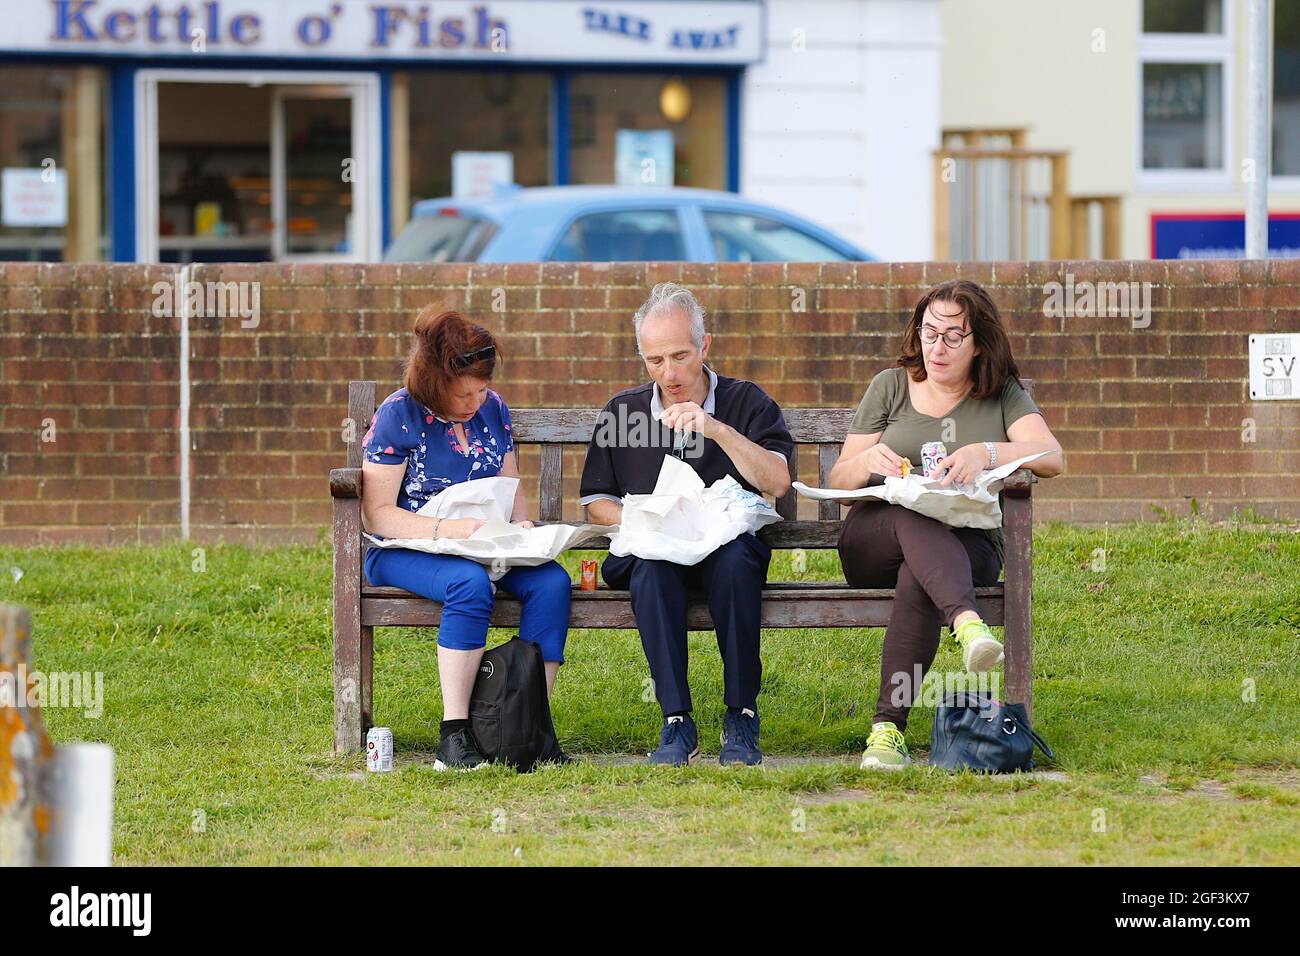 Rye, East Sussex, UK. 23 Aug, 2021. UK Weather: Sunny day in the historic town of Rye with visitors enjoying the fine and dry weather. A family sitting on a bench by the quay eating fish and chips. Photo Credit: Paul Lawrenson /Alamy Live News Stock Photo